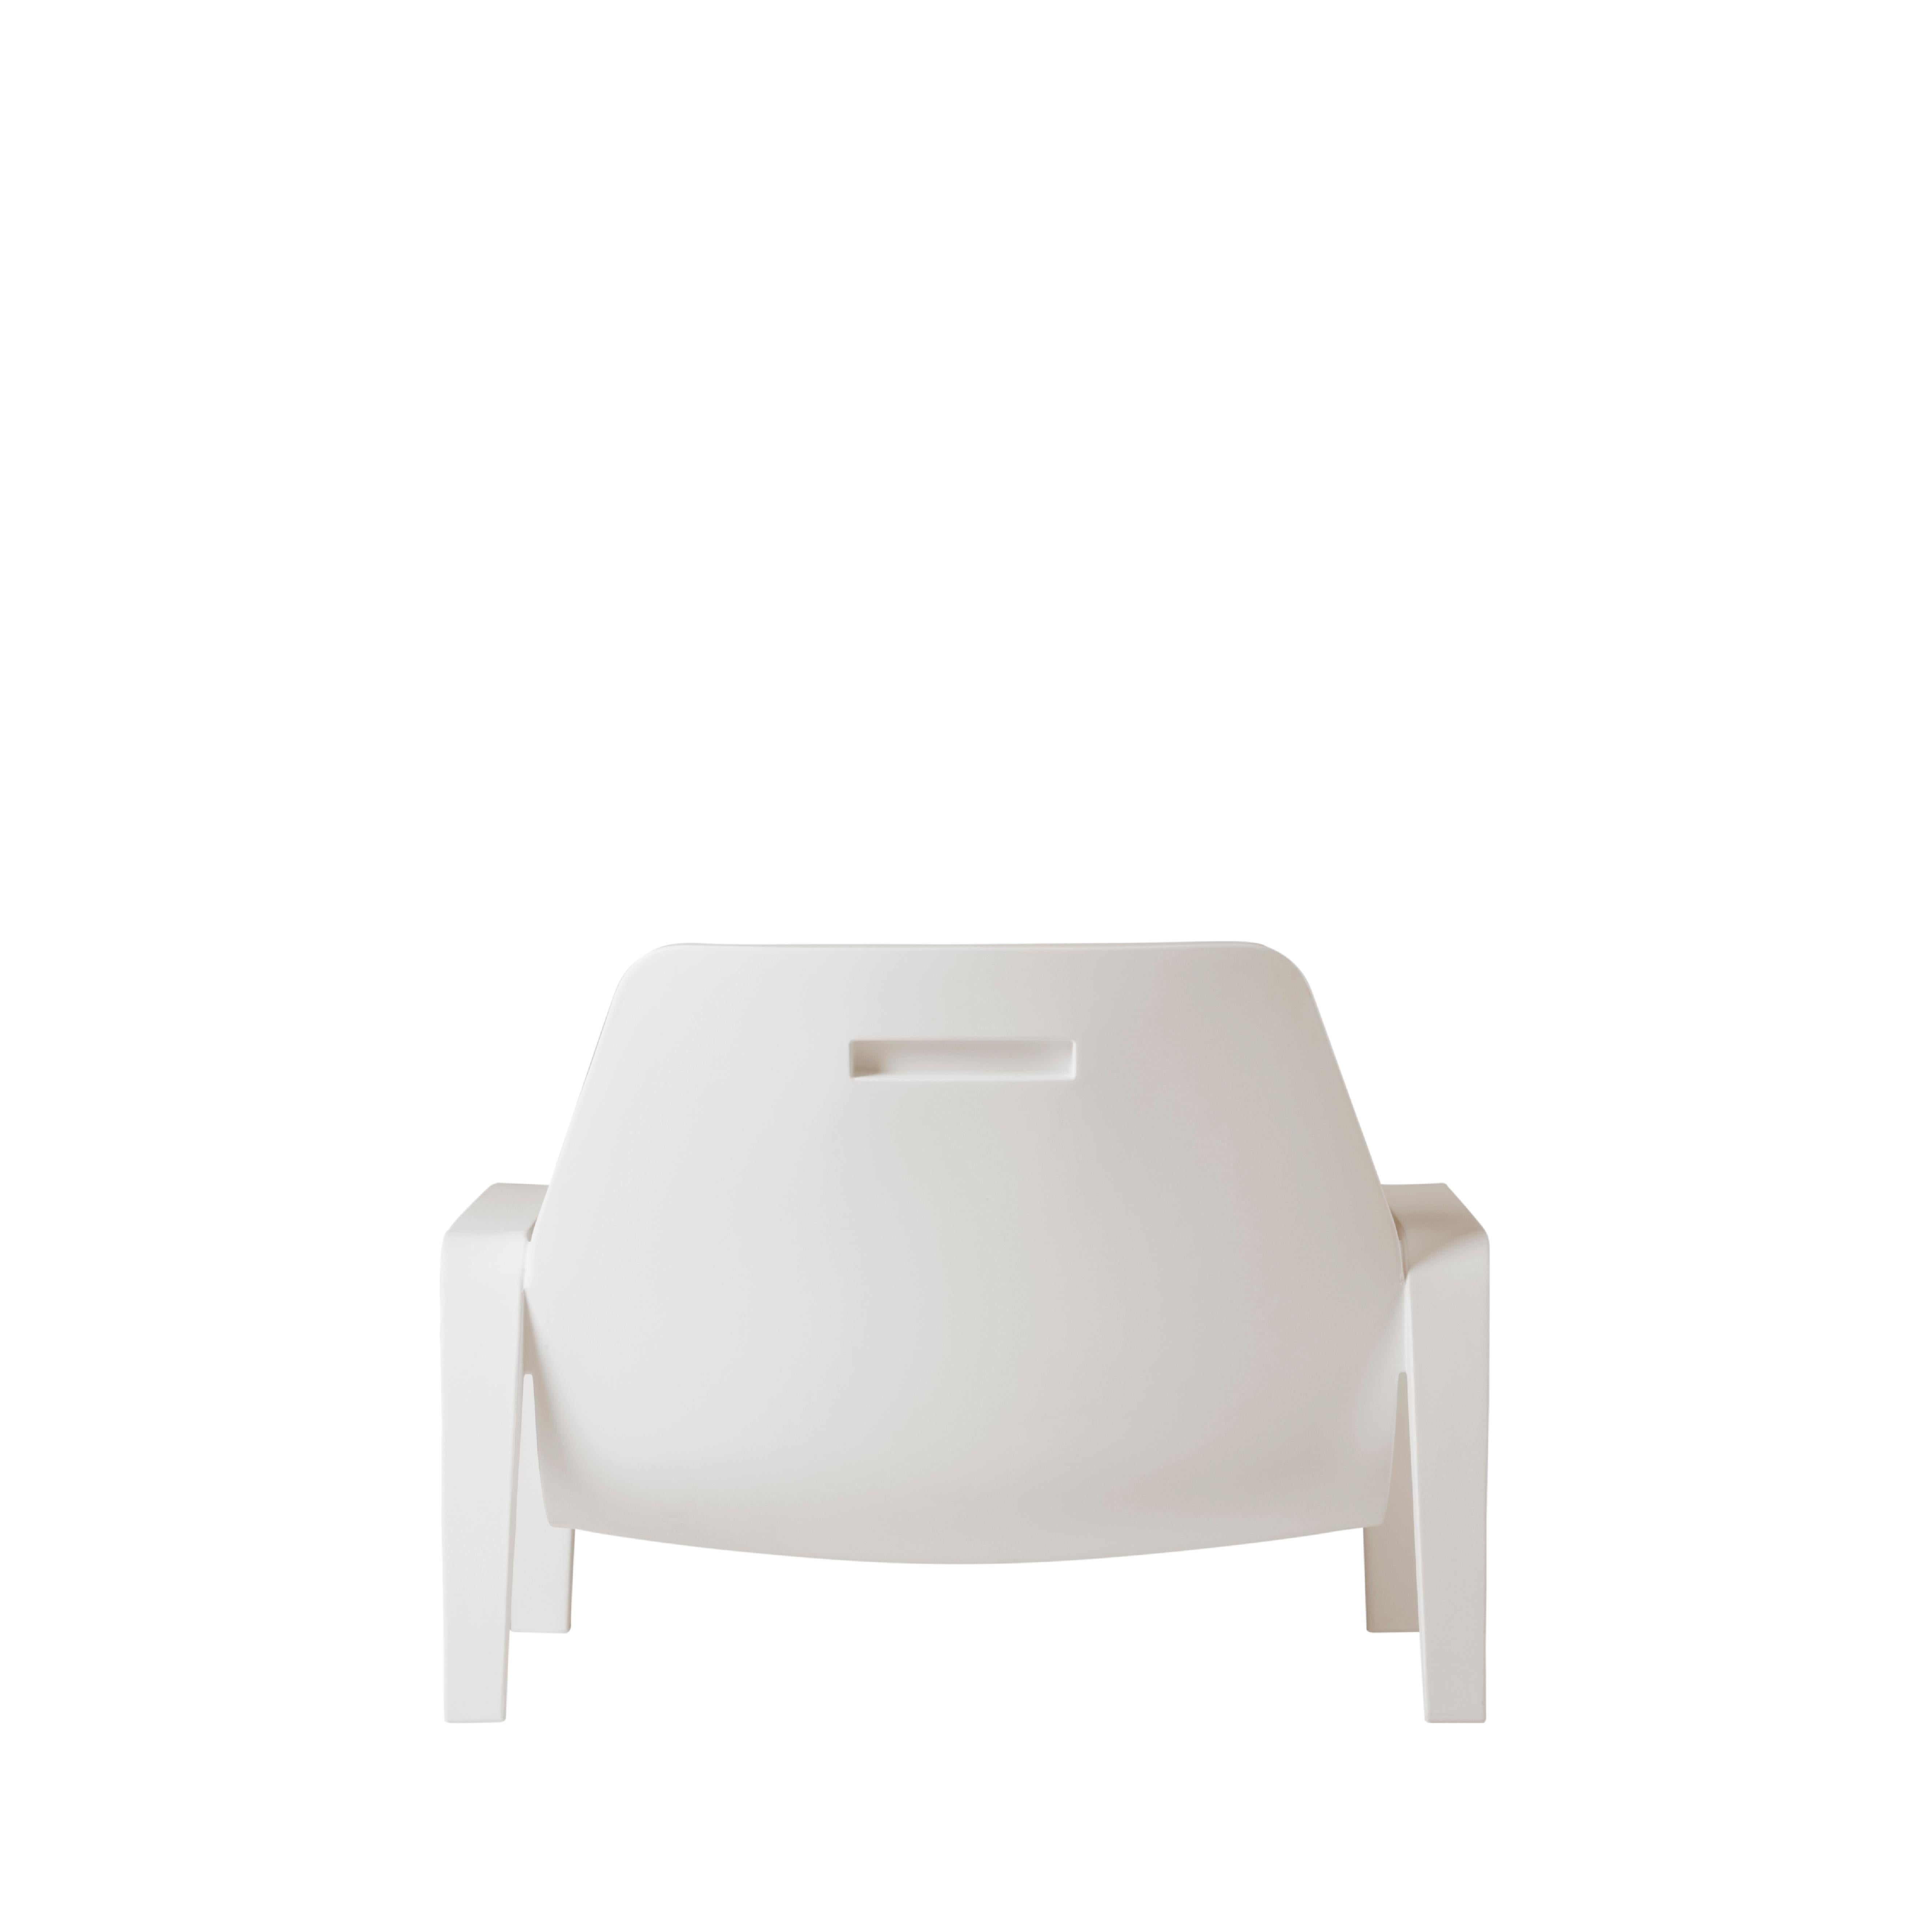 Slide Design America Armchair in Soft White Fabric with Milky White Frame In New Condition For Sale In Brooklyn, NY